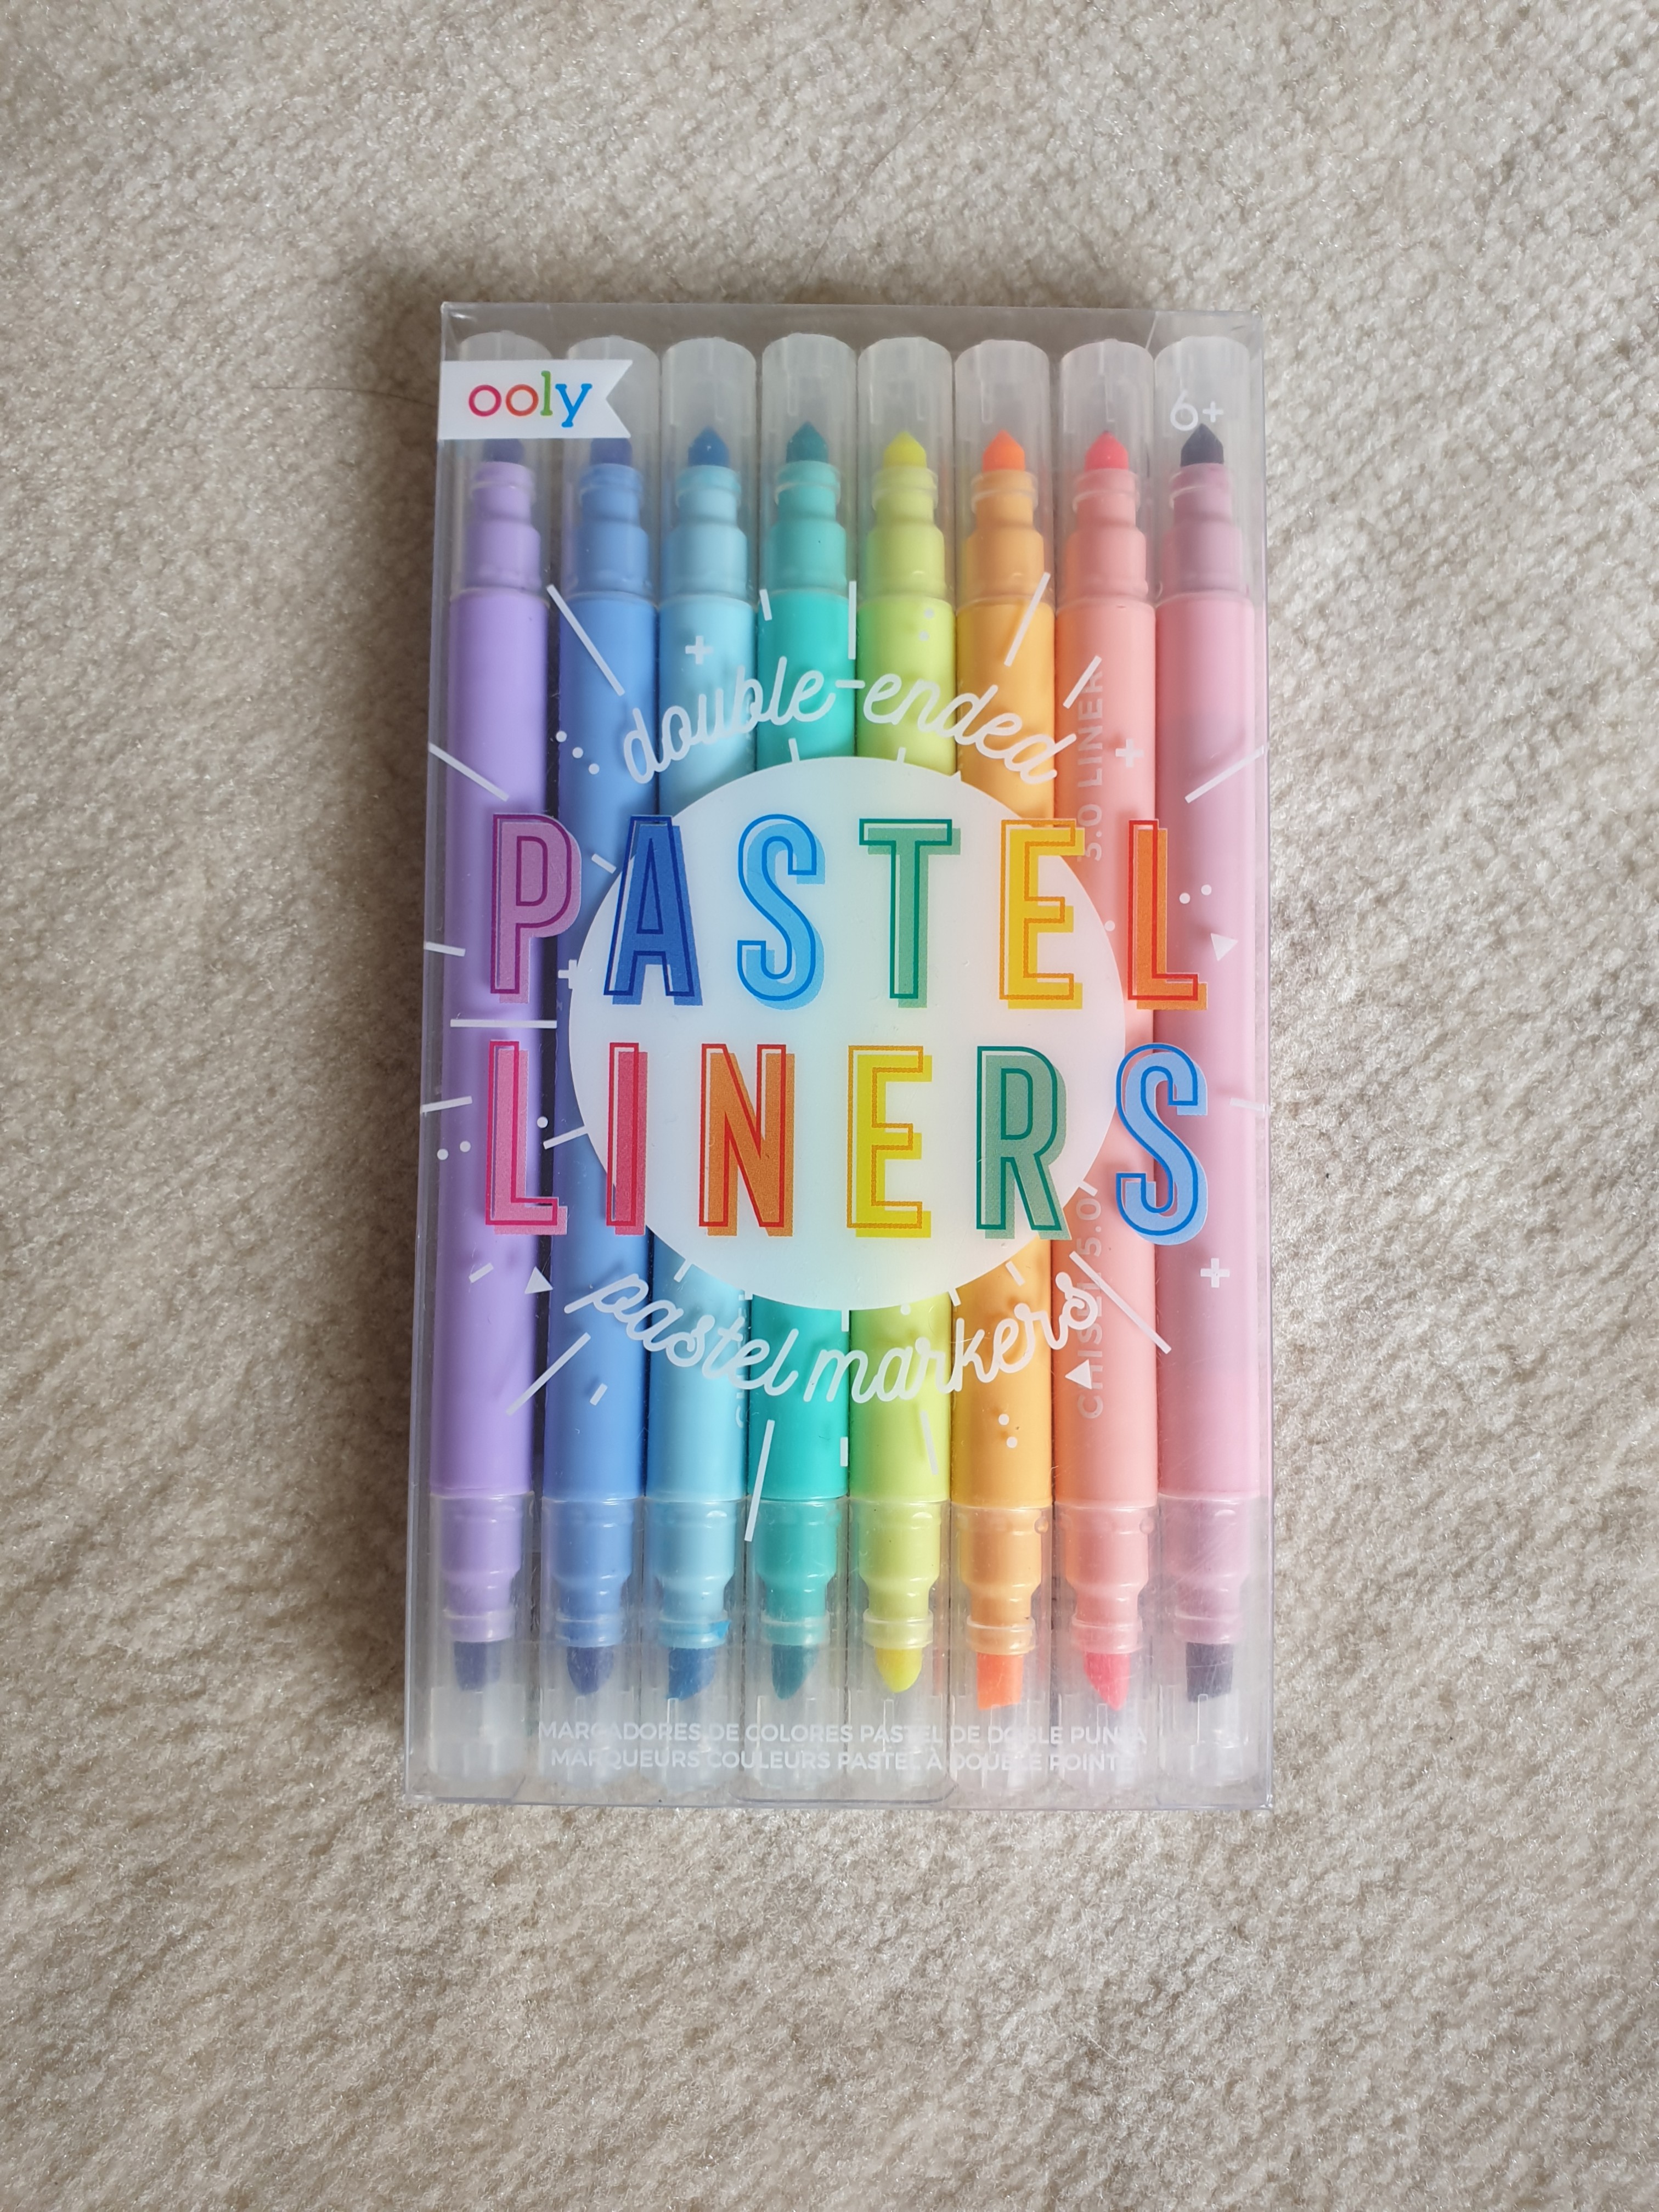 https://media.karousell.com/media/photos/products/2021/5/14/pastel_liners_markers_1621003985_2af2d748.jpg